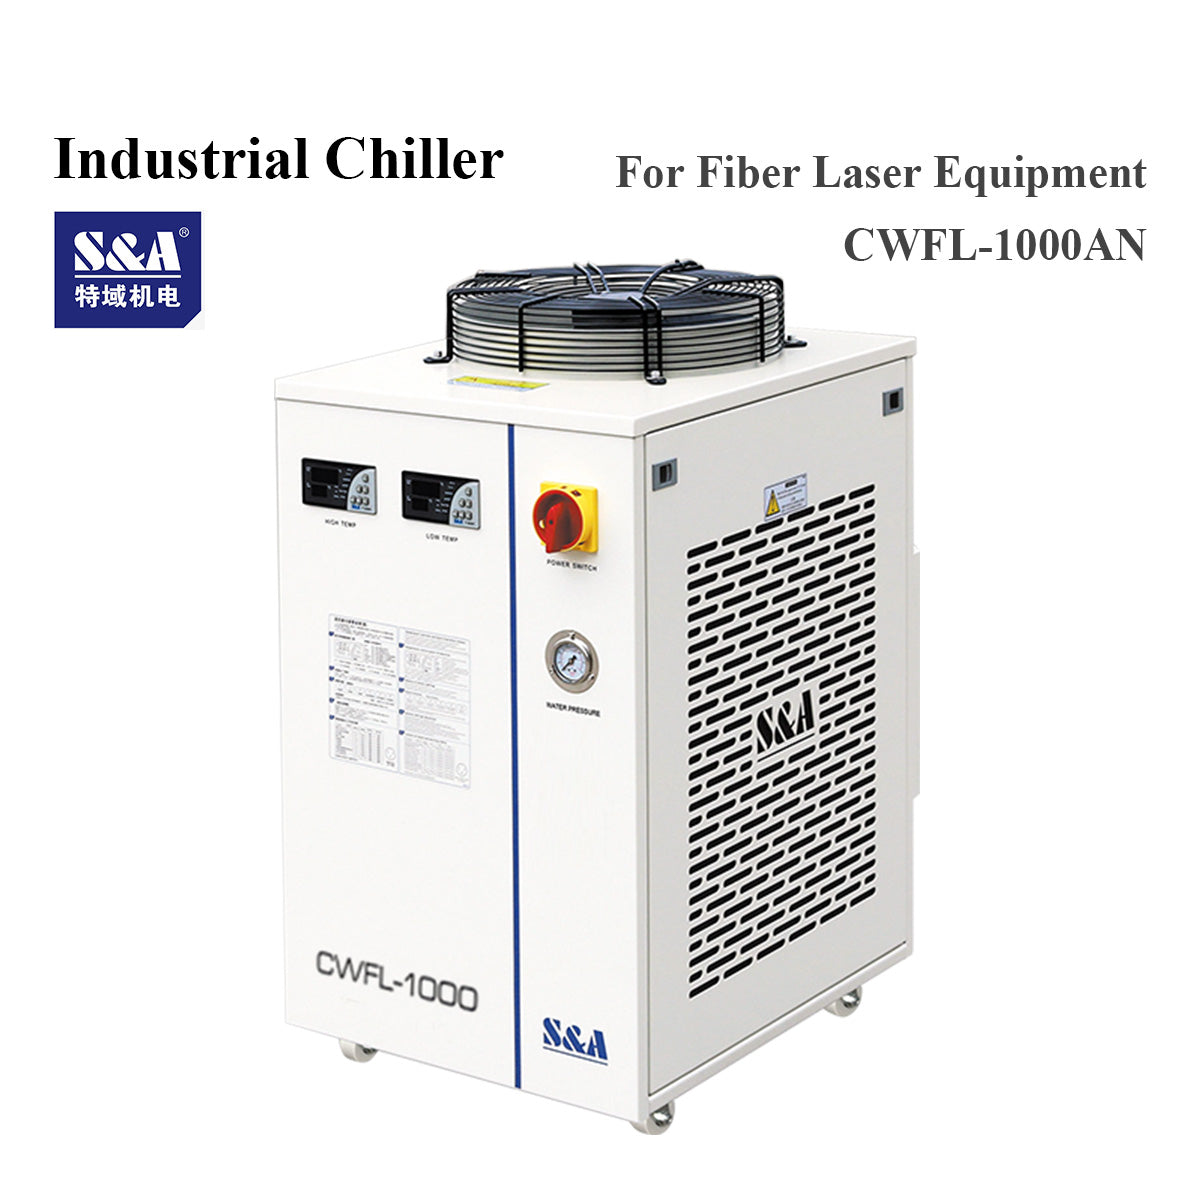 Startnow Industry Water Chiller CWFL-1000AN & 1000BN S&A 50/60HZ With Dual Temperature Control Systerm for Fiber Laser Machine